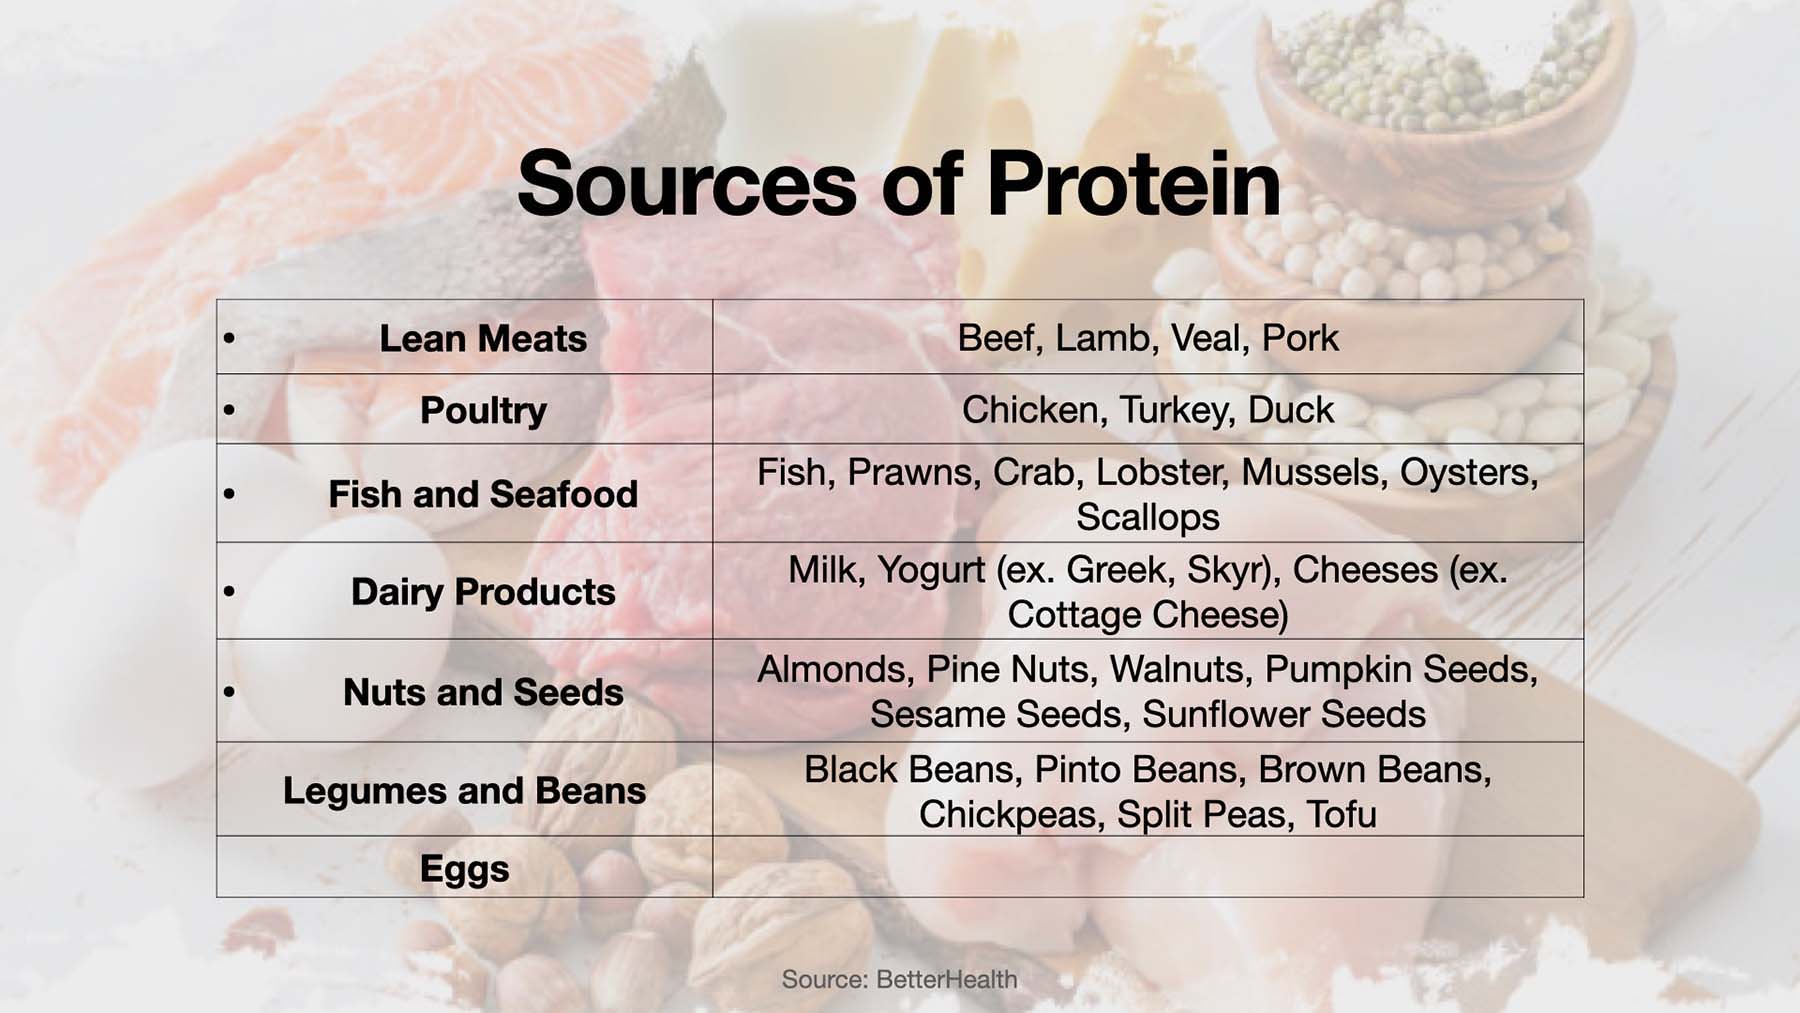 Sources of Protein in Goods